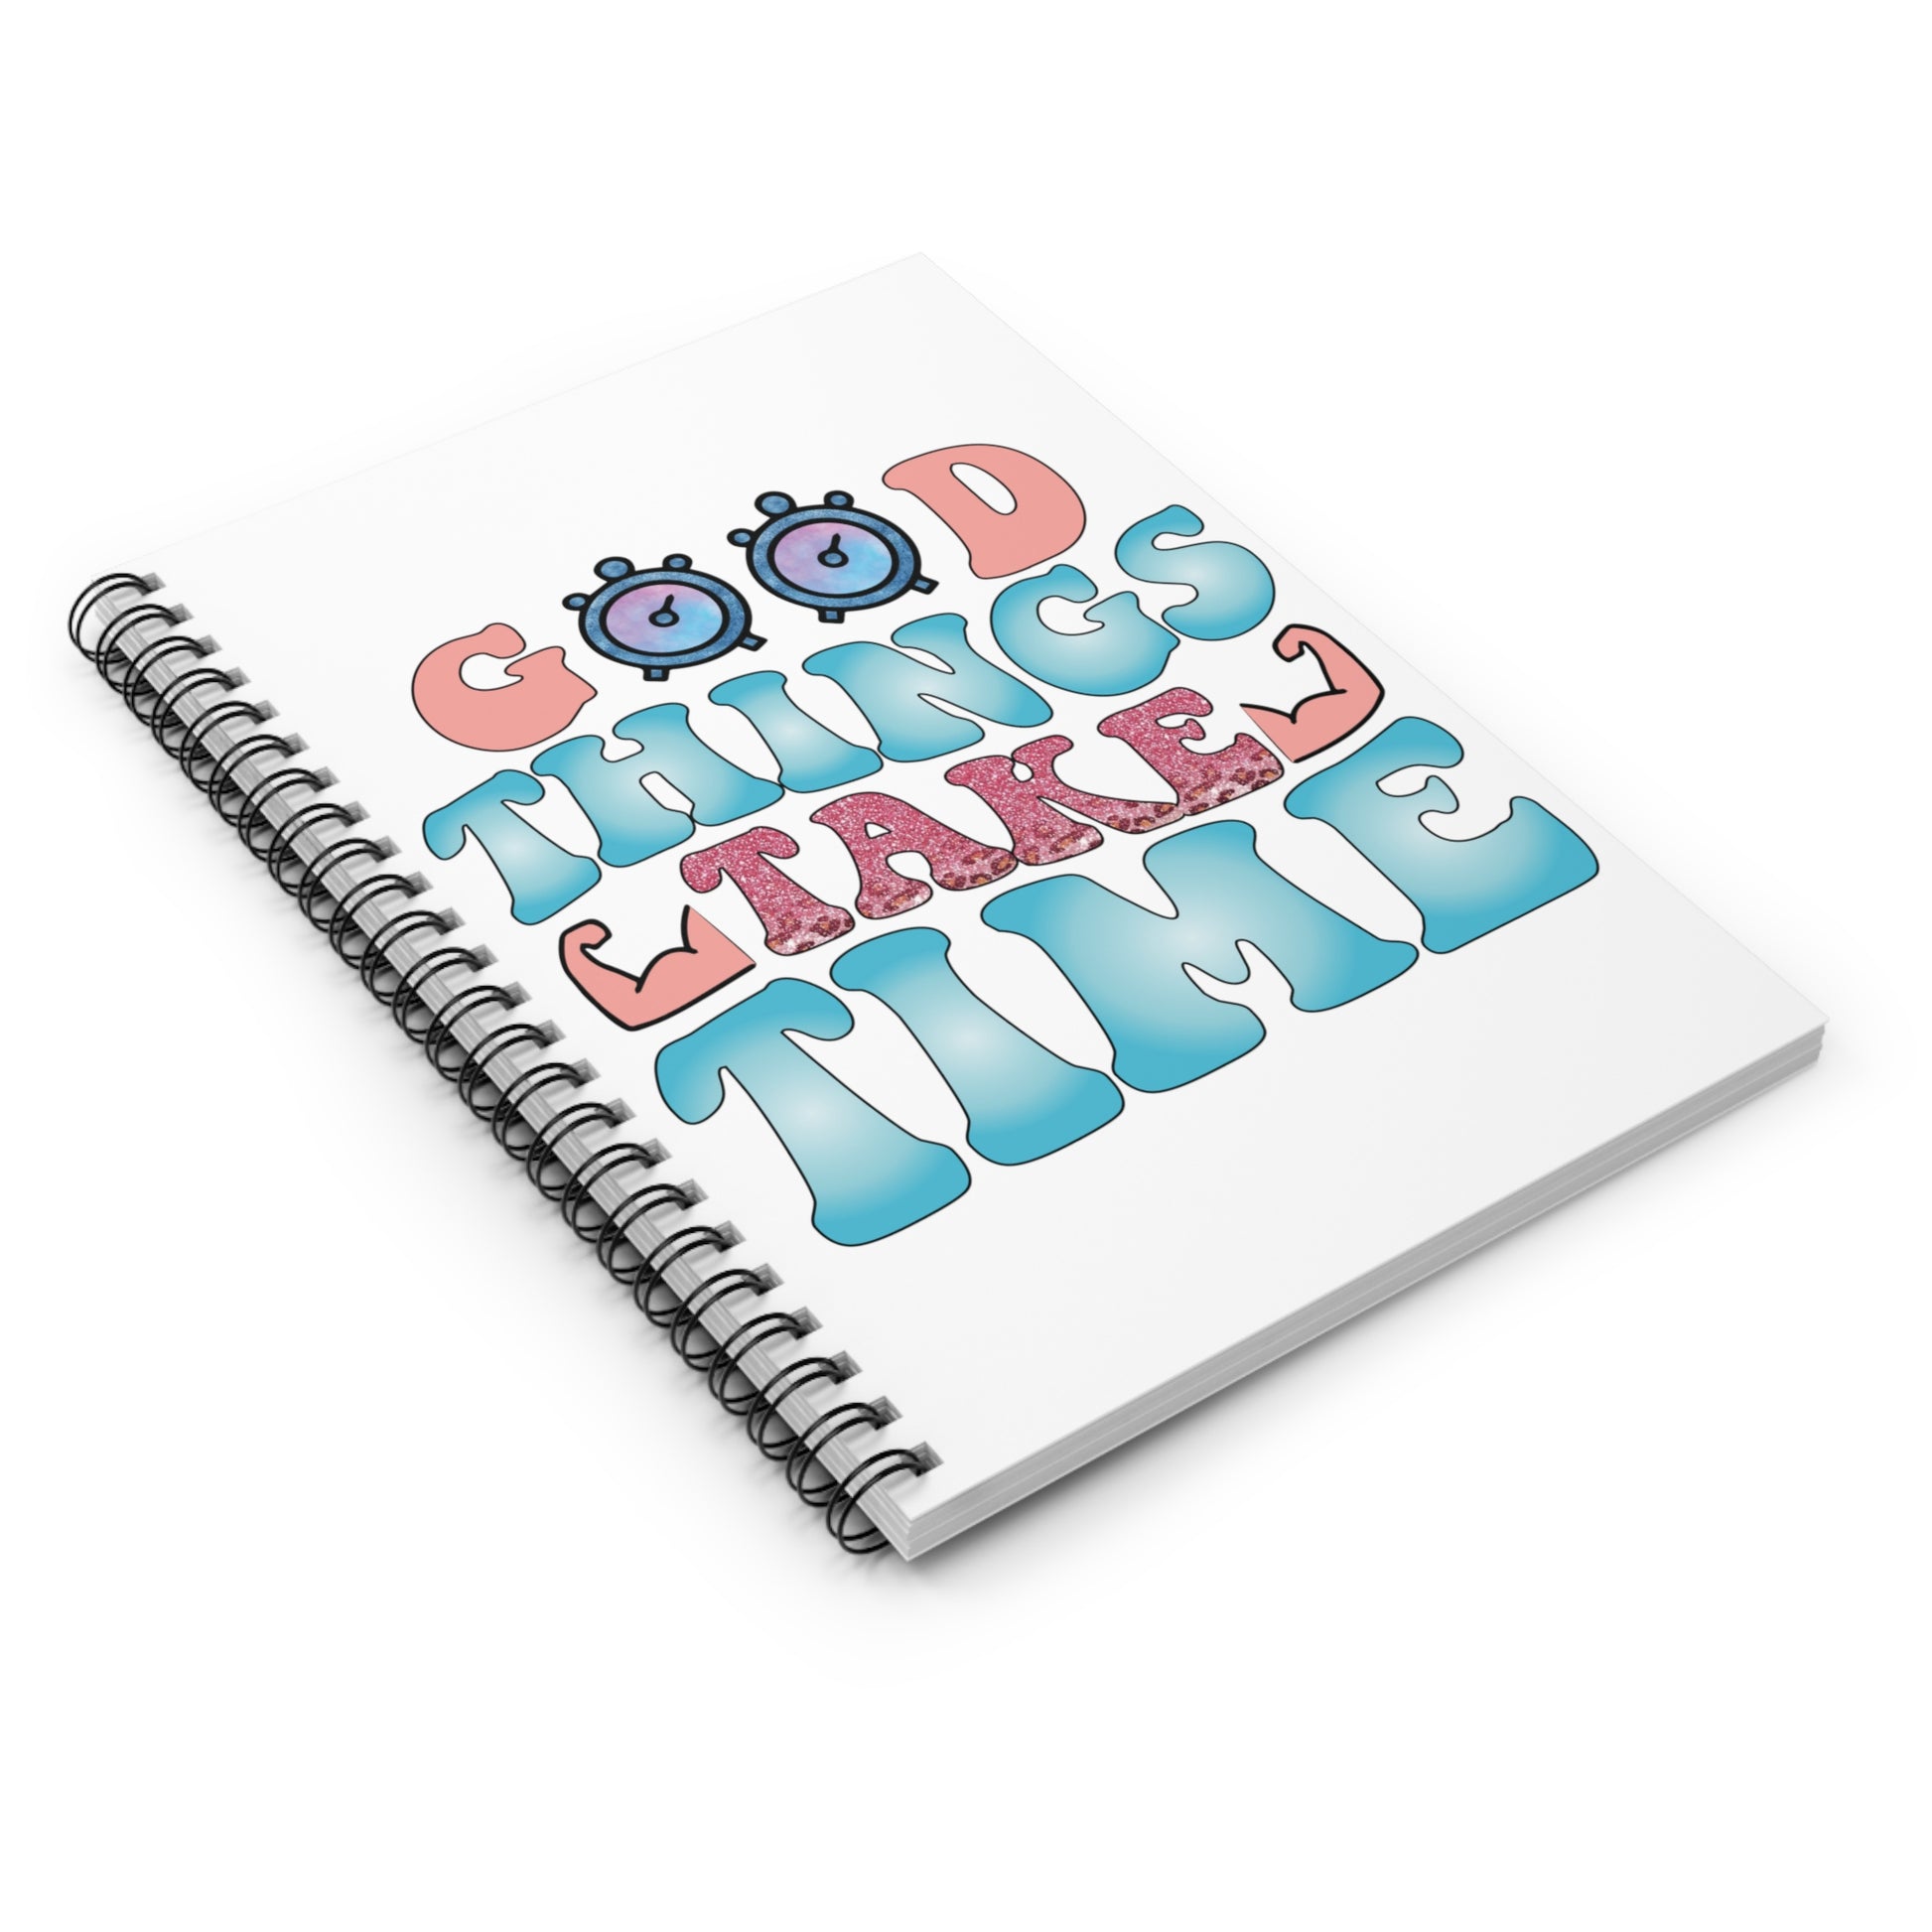 Good Things Take Time: Spiral Notebook - Log Books - Journals - Diaries - and More Custom Printed by TheGlassyLass